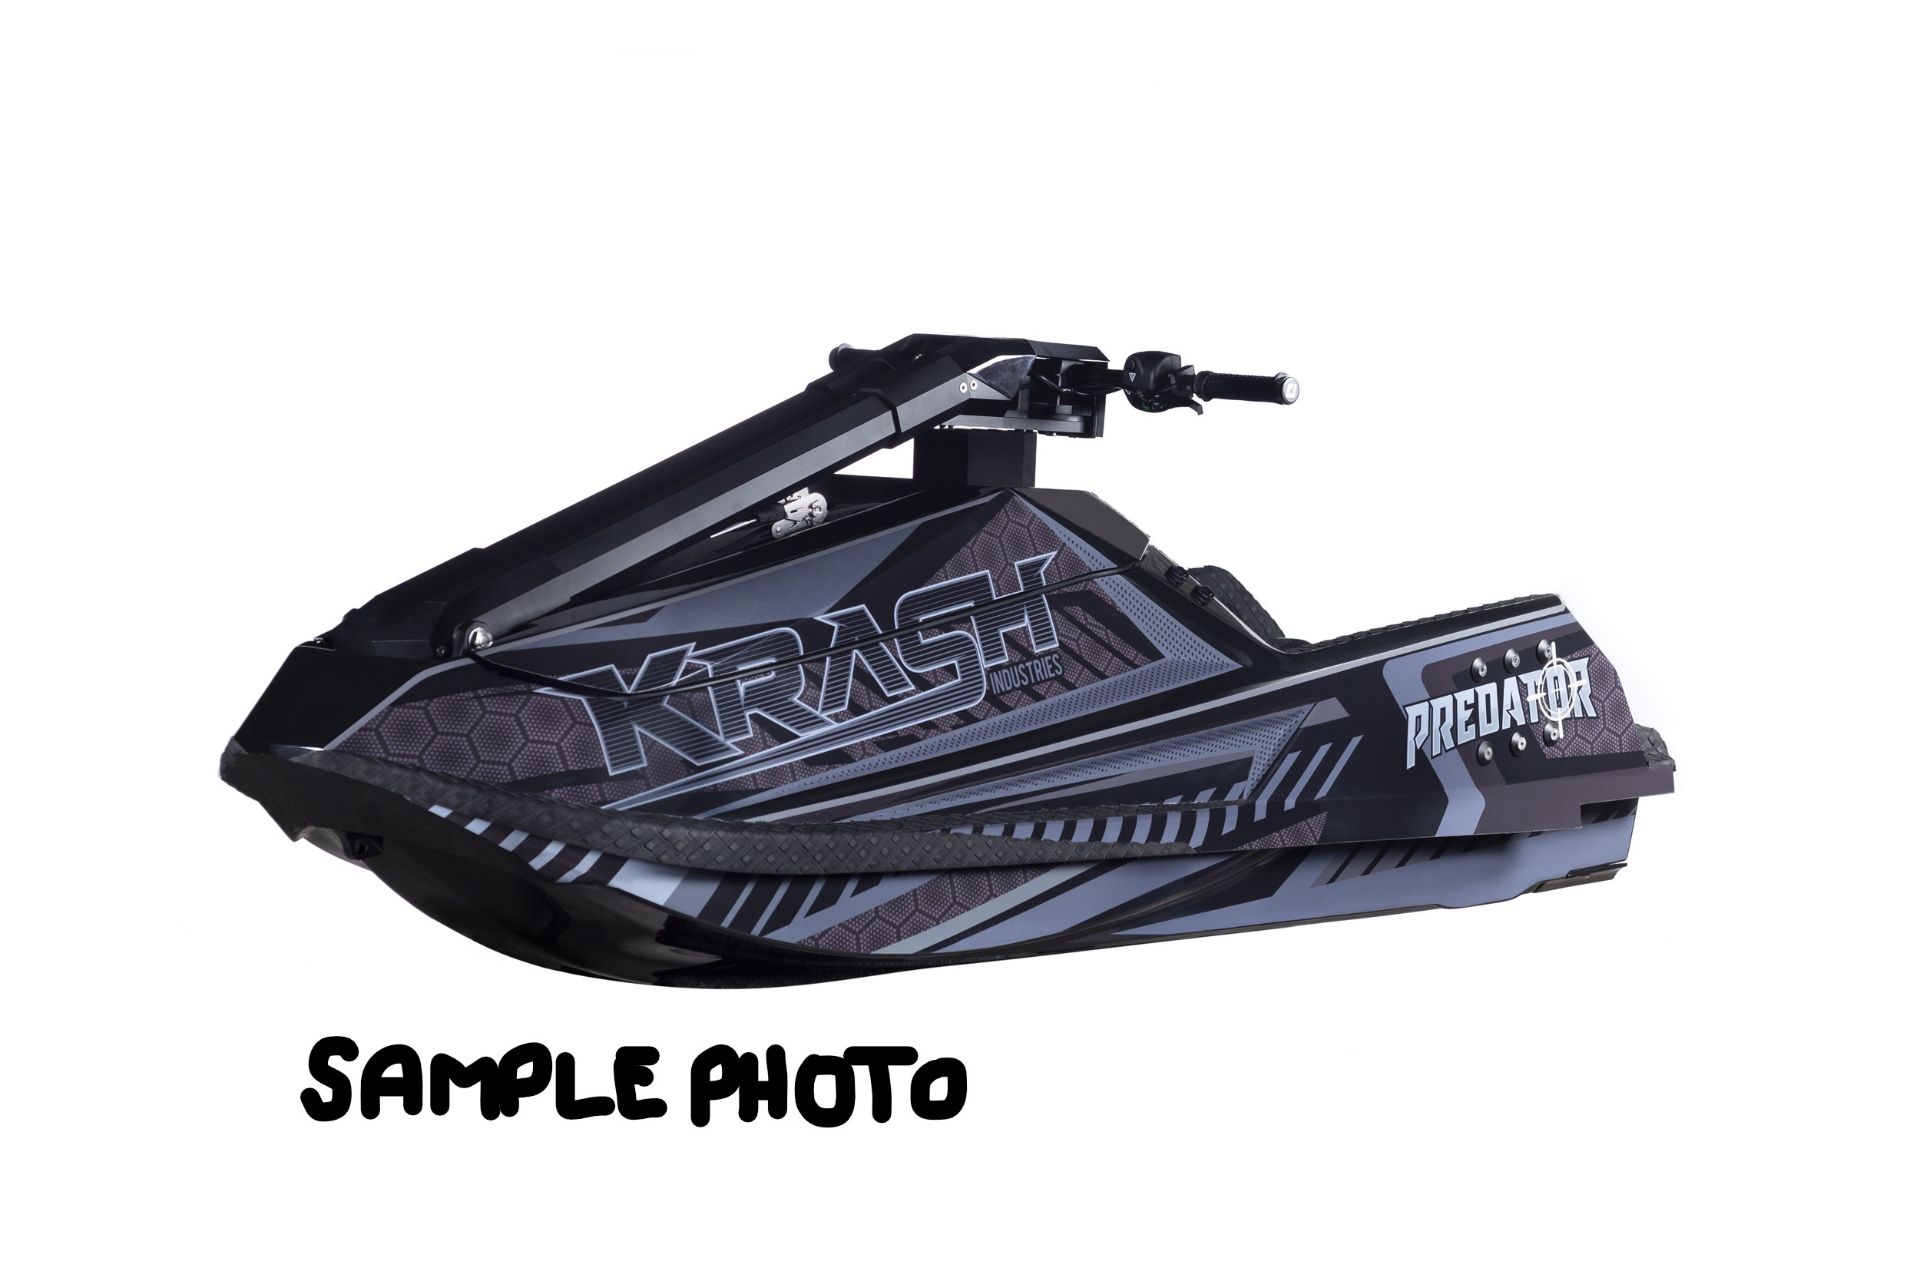 A Krash Predator 2021 Jet Ski, black, no battery (new, in packing crate, requires assembly).